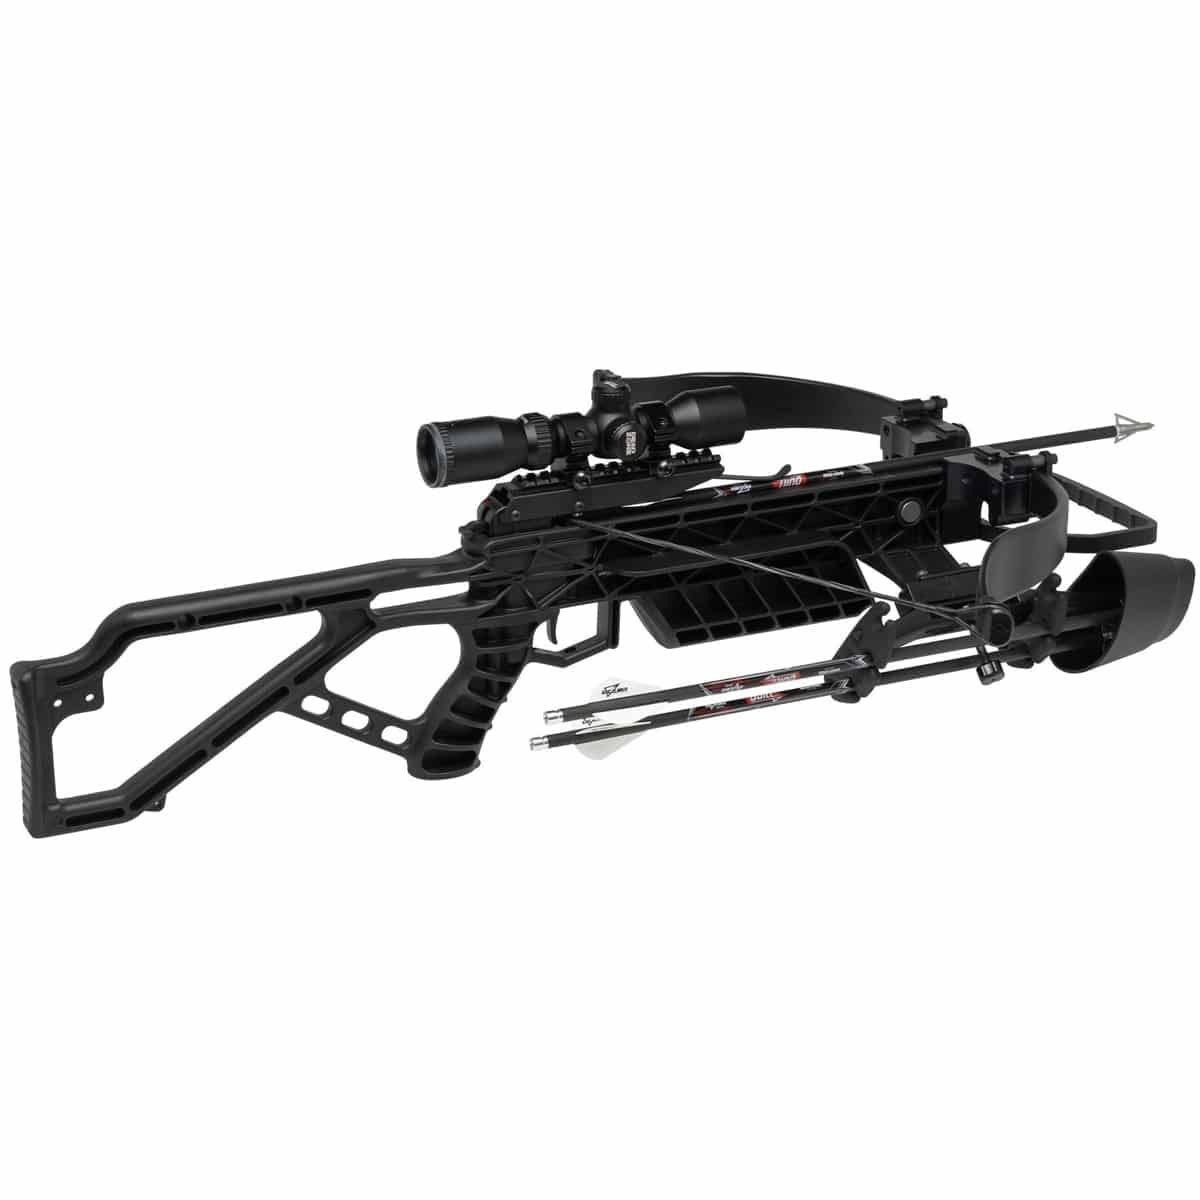 Excalibur Mag Air Crossbow Package Black with Fixed Power Scope